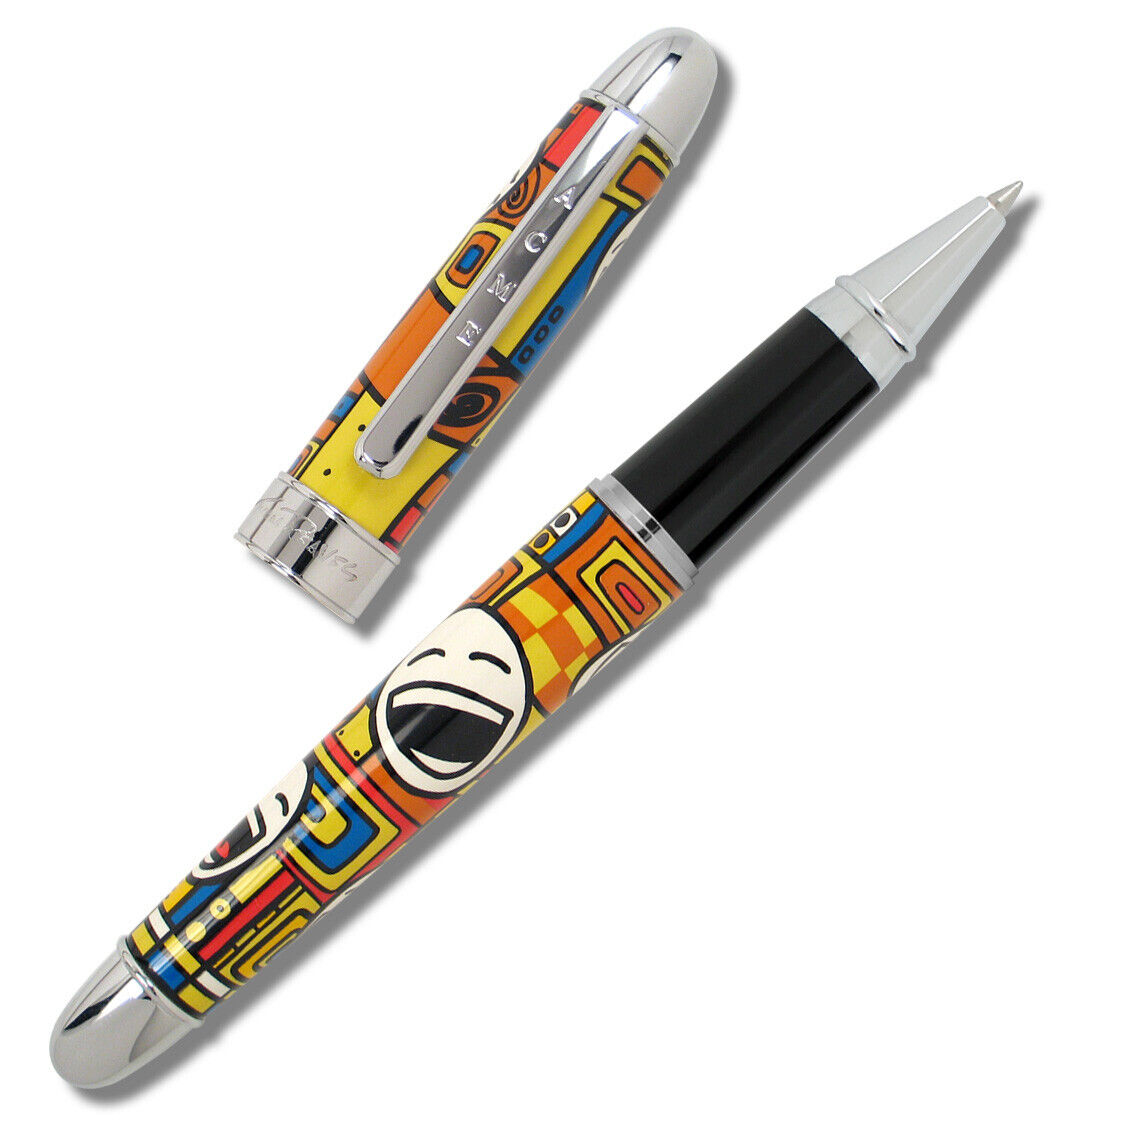 ACME Studio Archived “Happy" Roller Ball Pen by T. REAVES - NEW